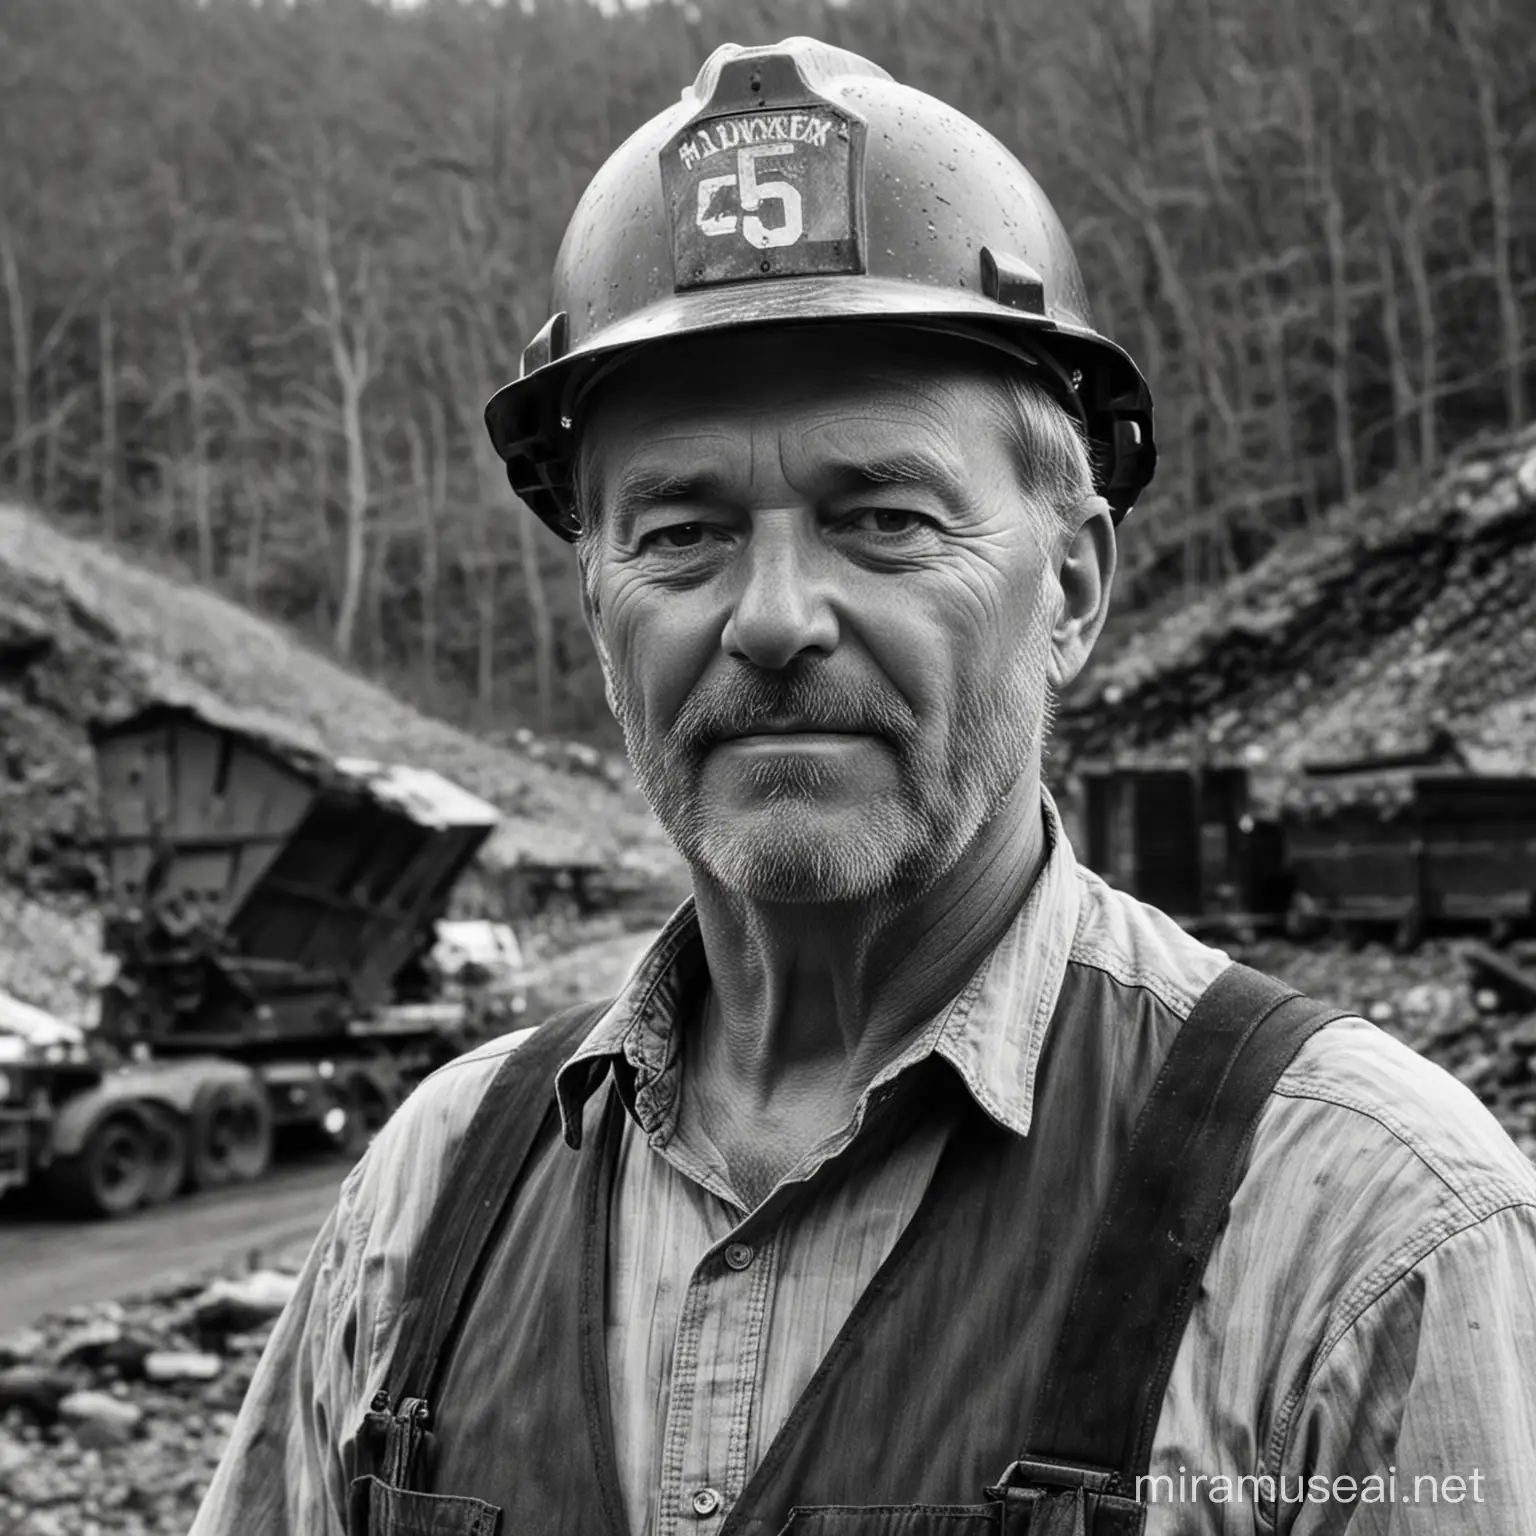 the most powerful coal mine owner in the Appalachian mountains in his late 50s